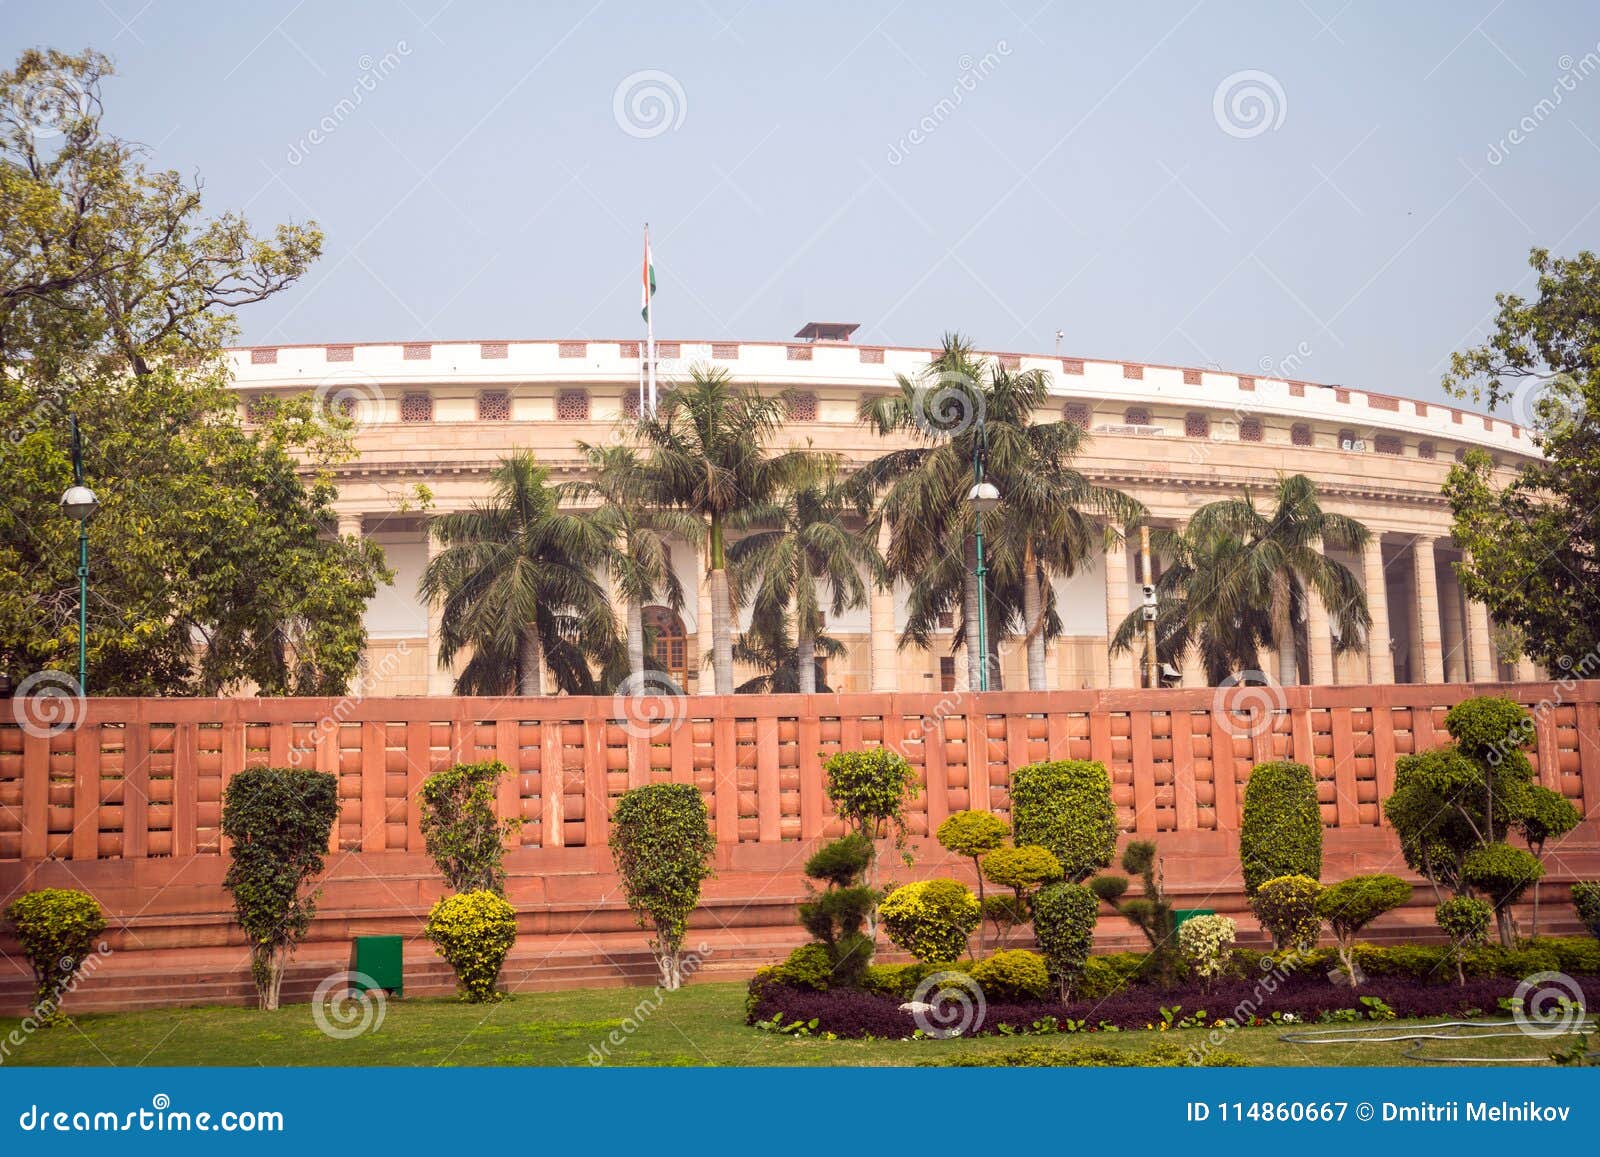 the sansad bhawan or parliament building is the house of the parliament of india,